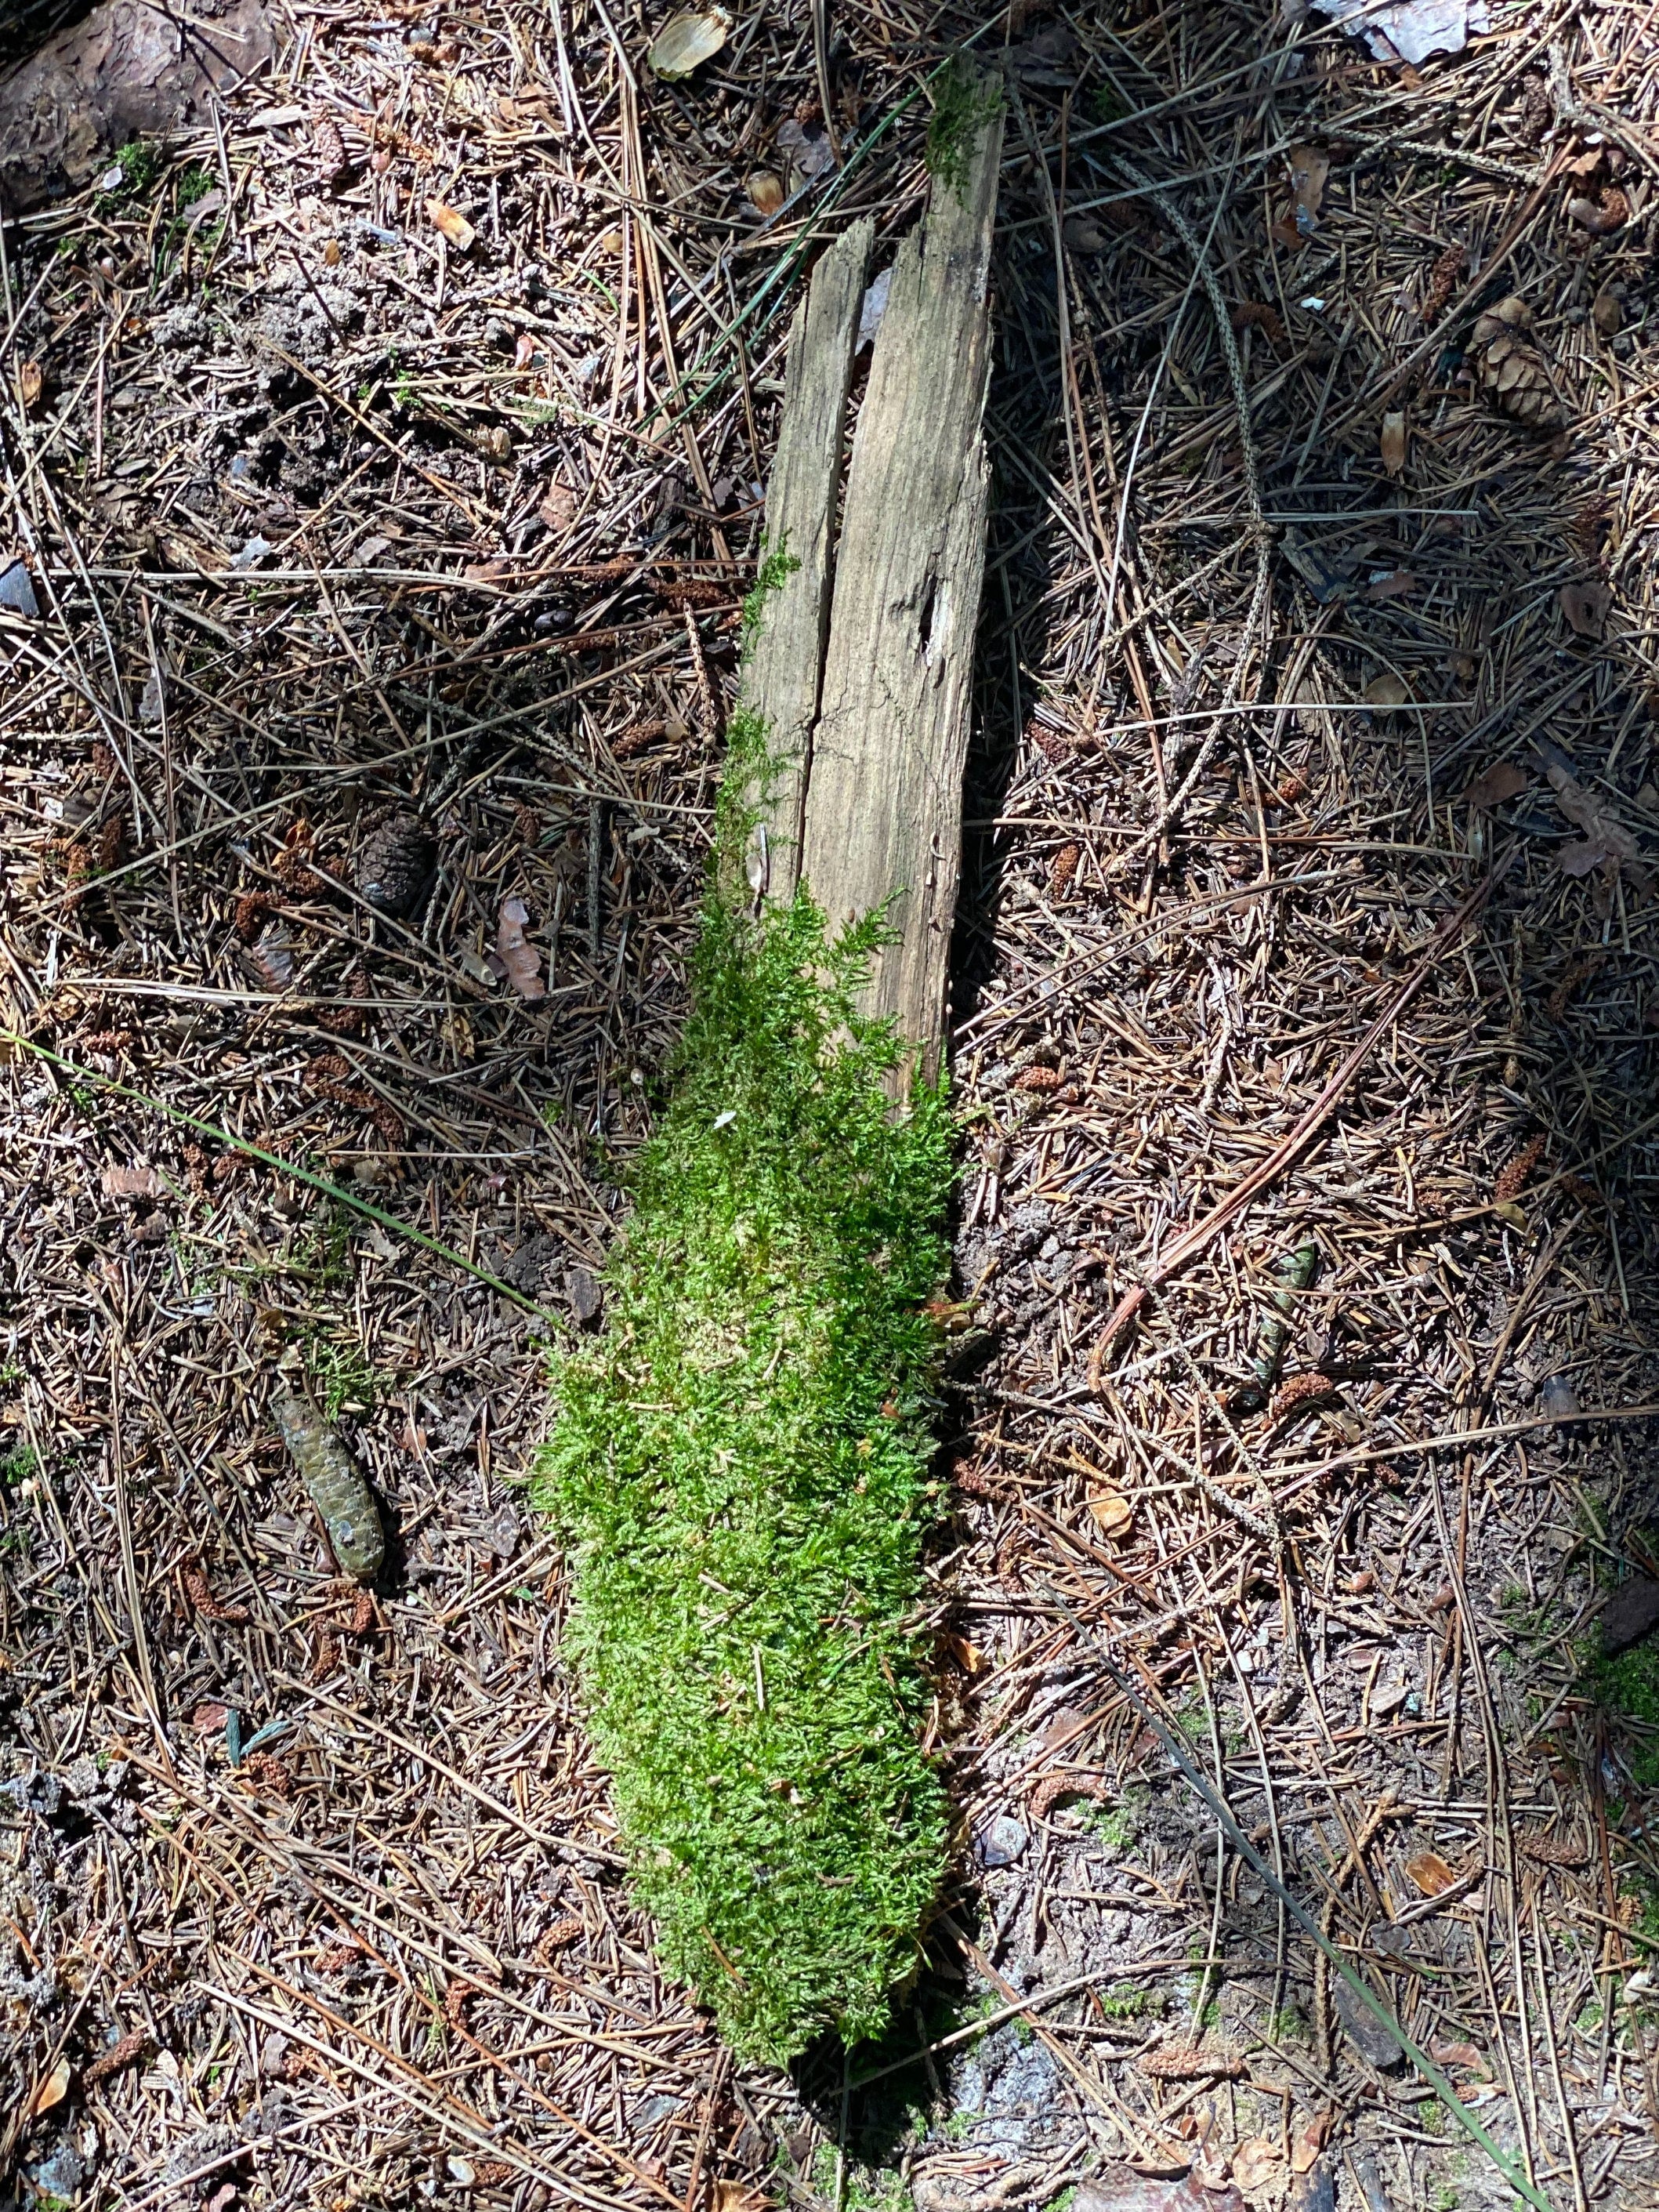 Moss Covered Bark, Mossy Bark, Approximately 16 Inches Long by 3 Inches Wide and 1 Inch High